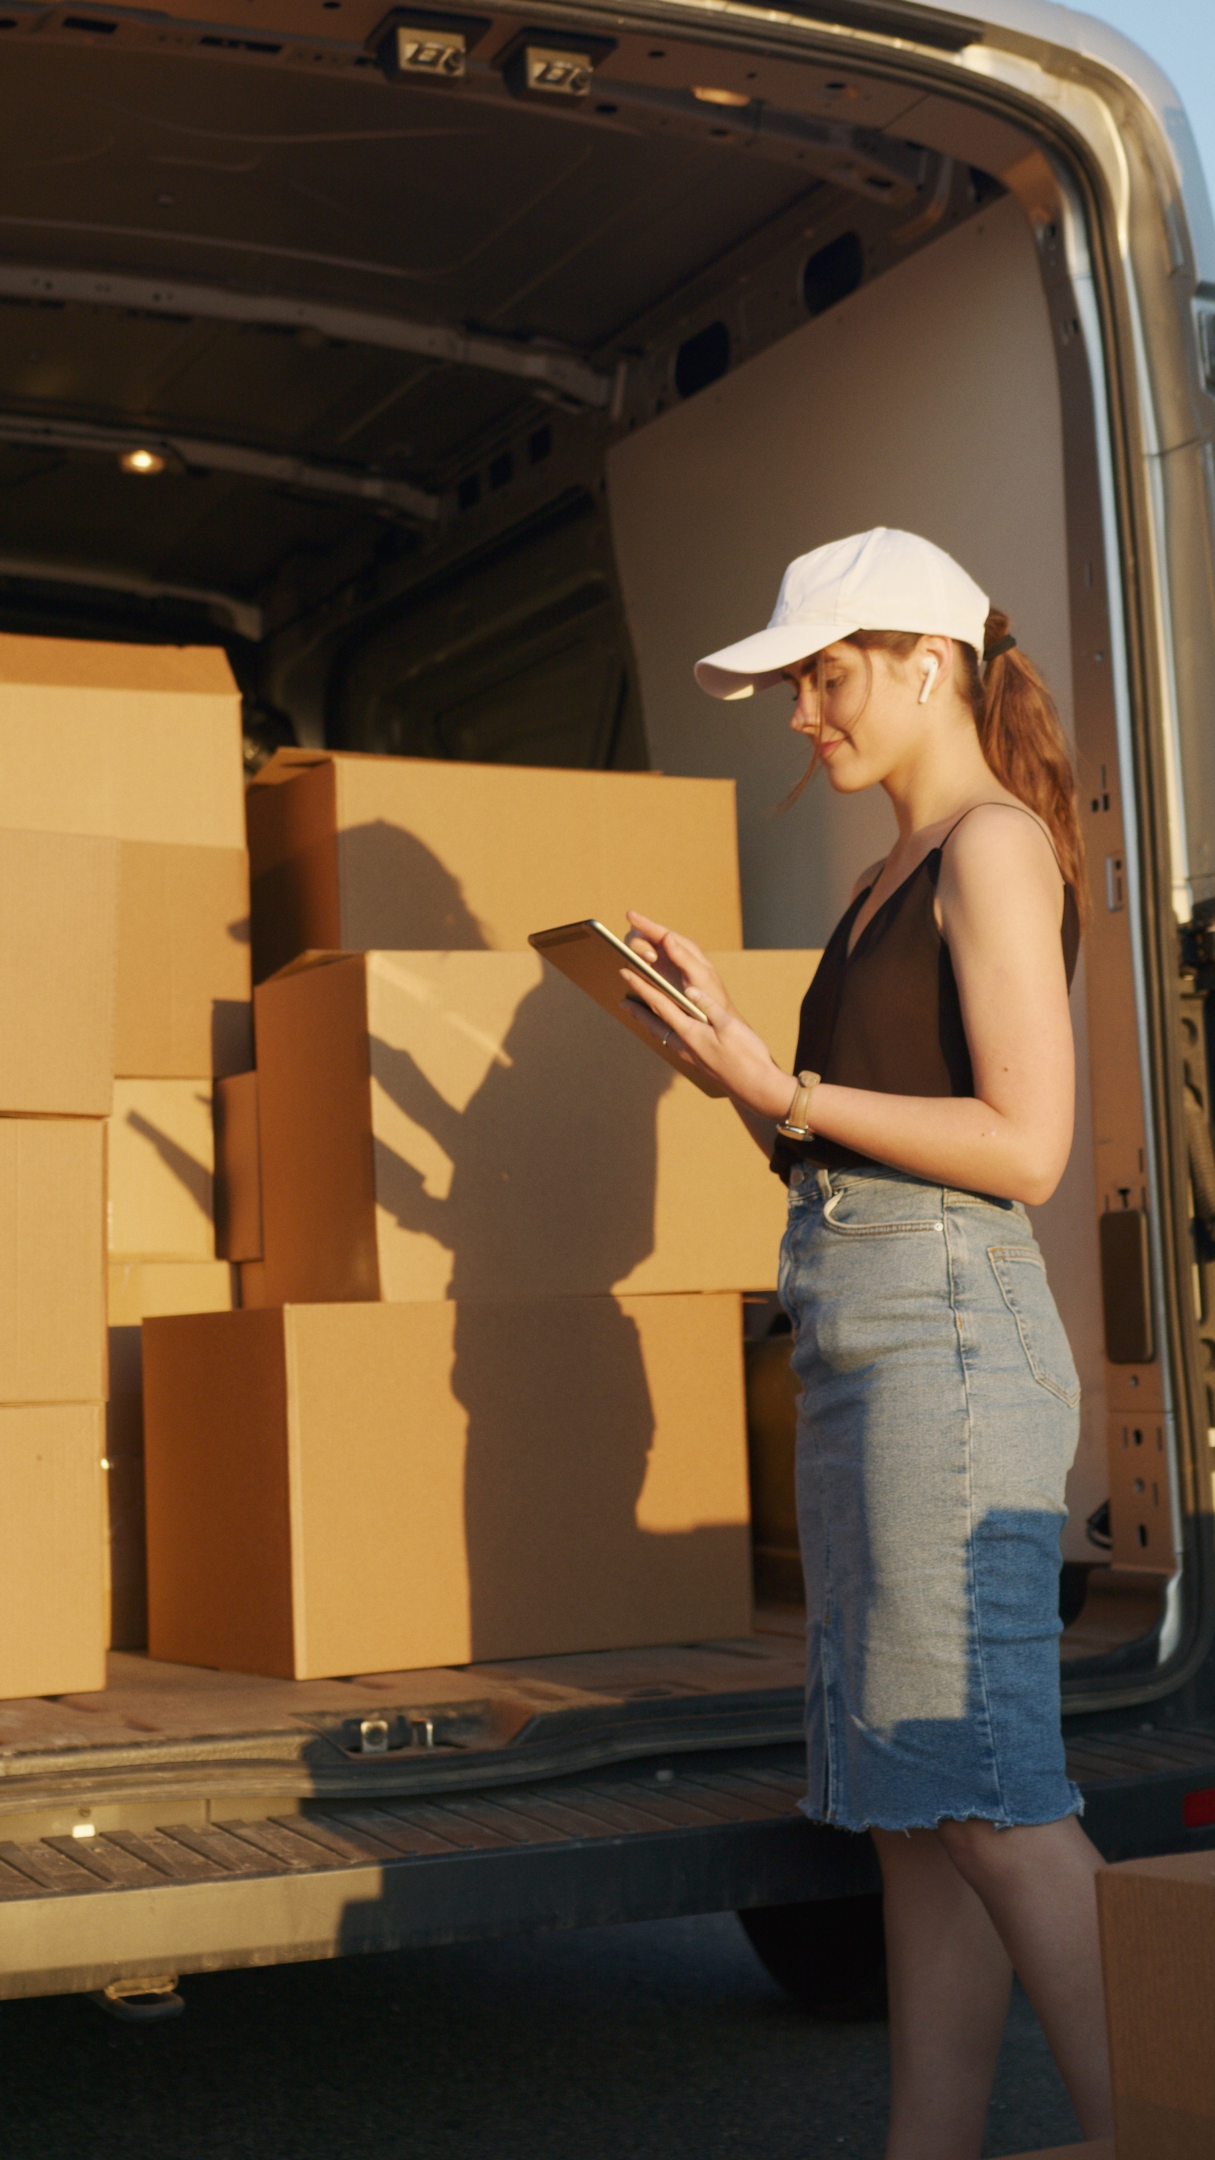 Wholesale delivery worker tracks shipments.